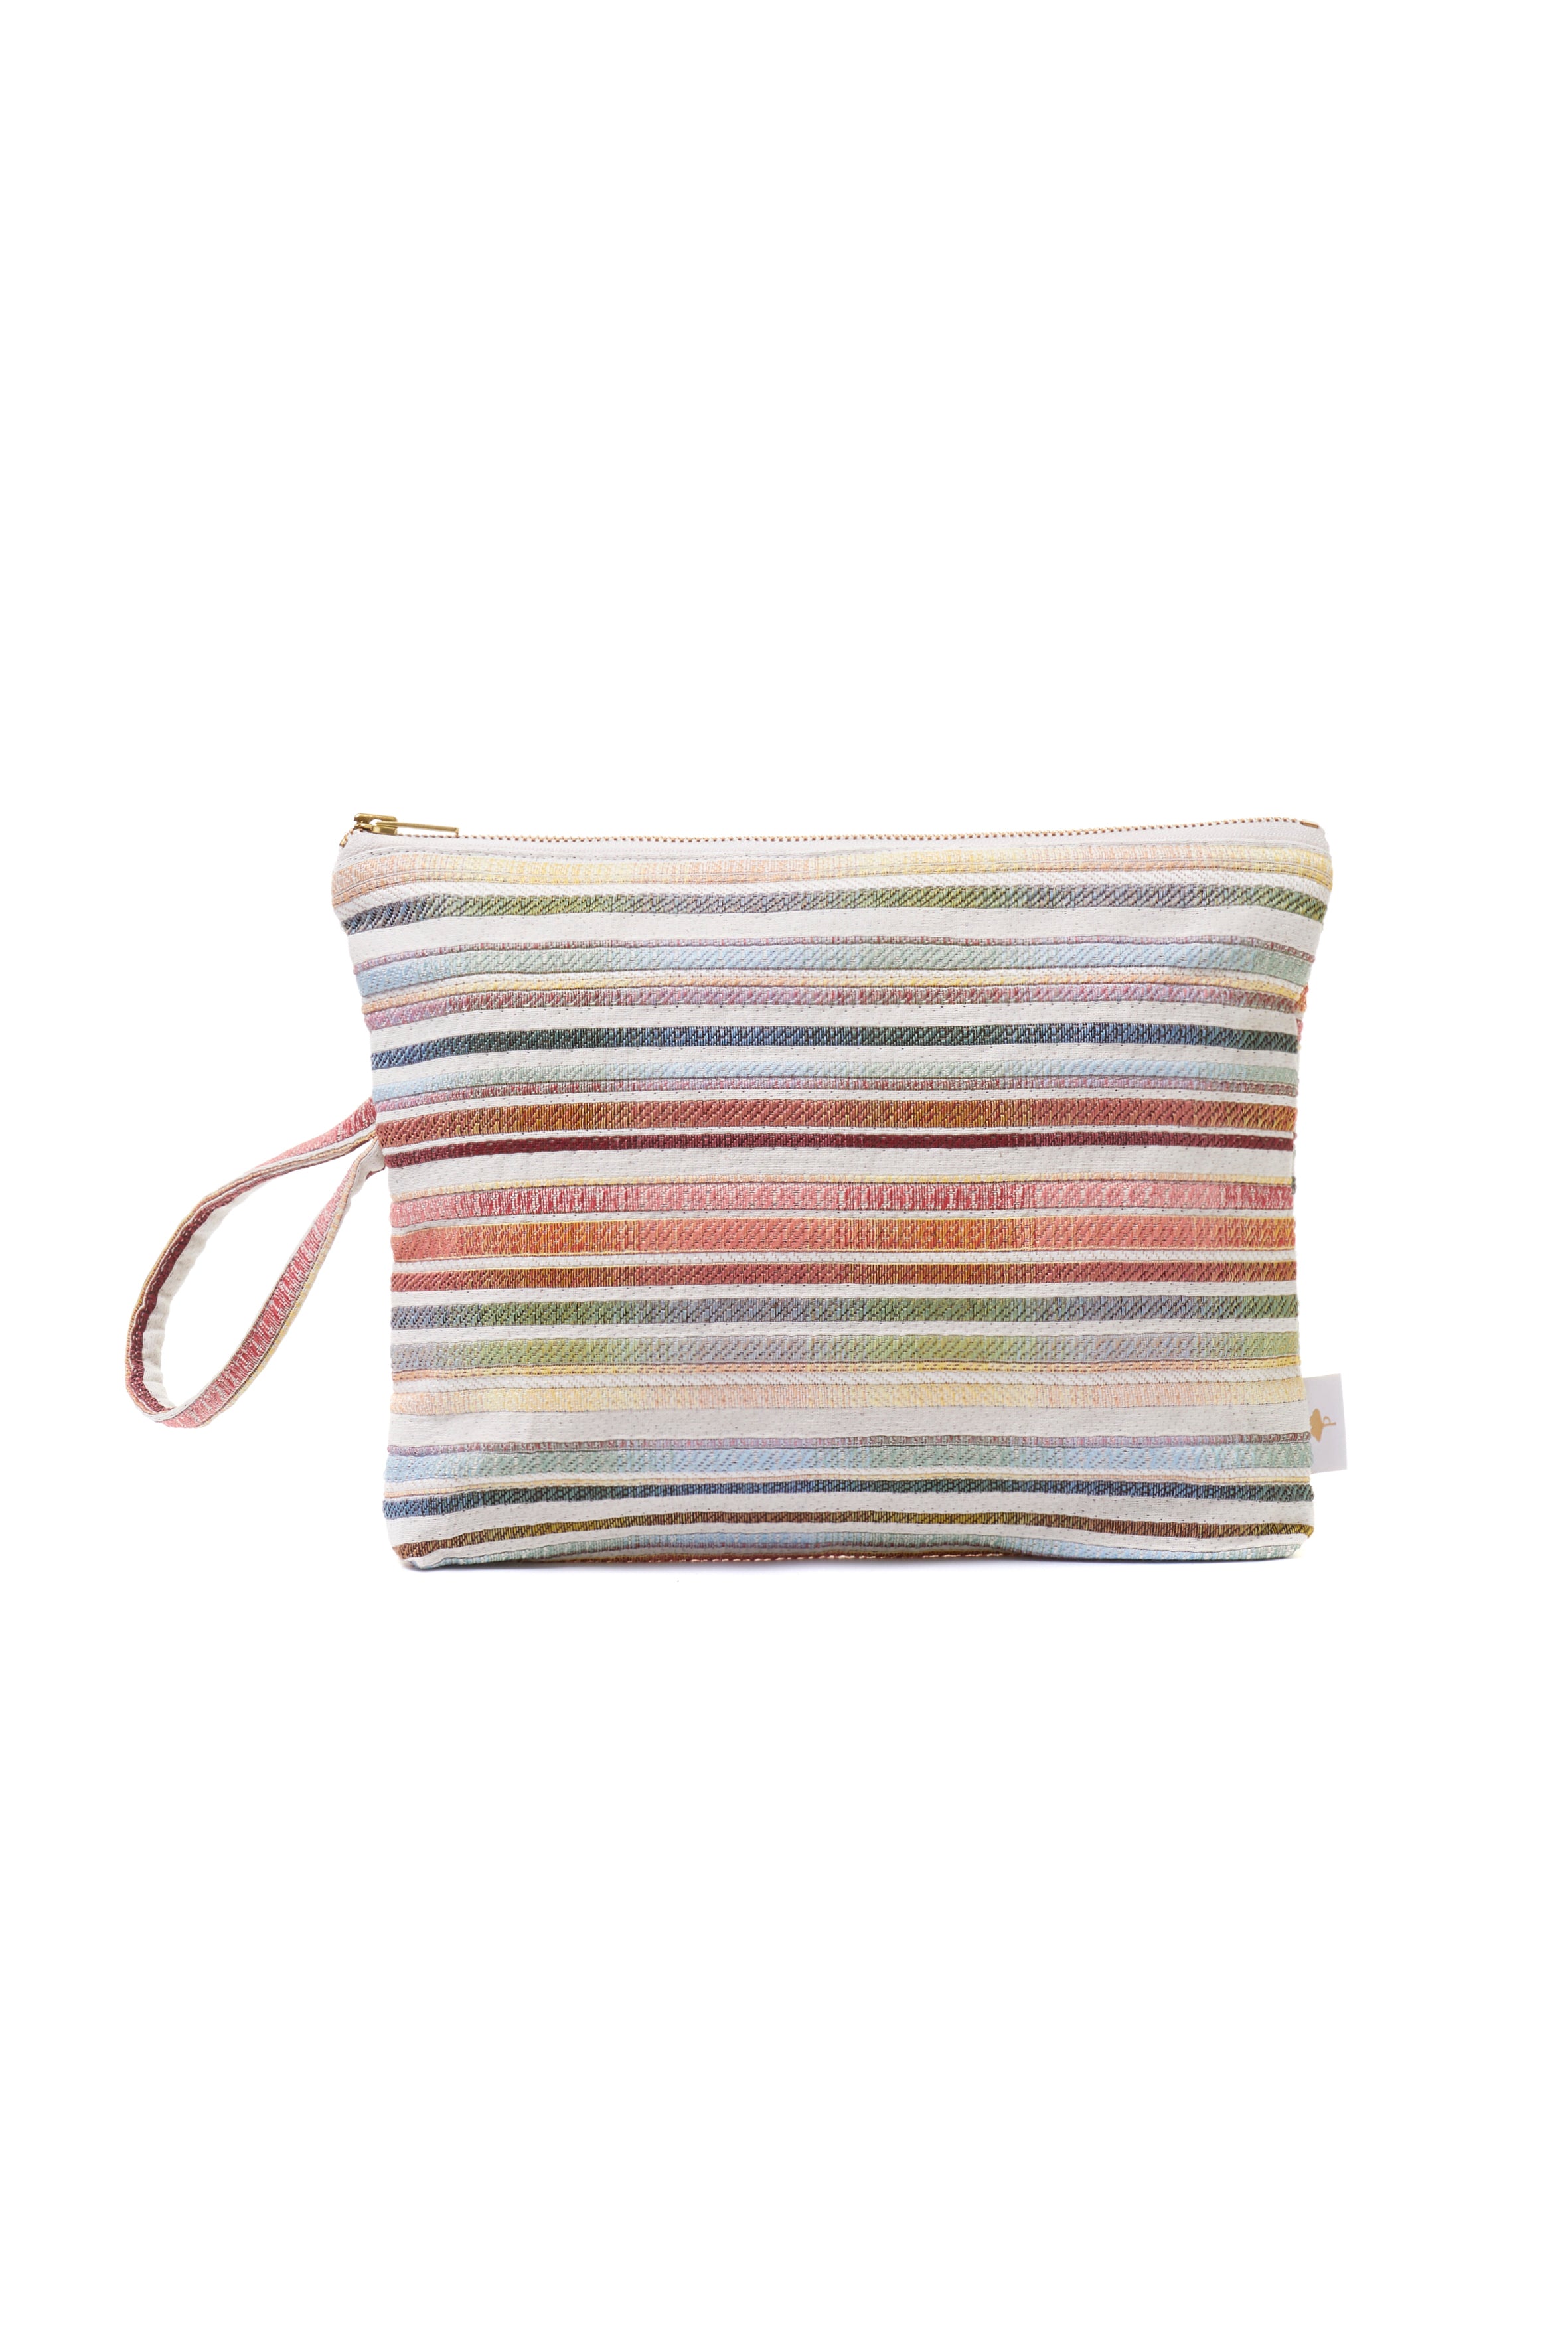 TRAVEL POUCH LARGE - STRIPE